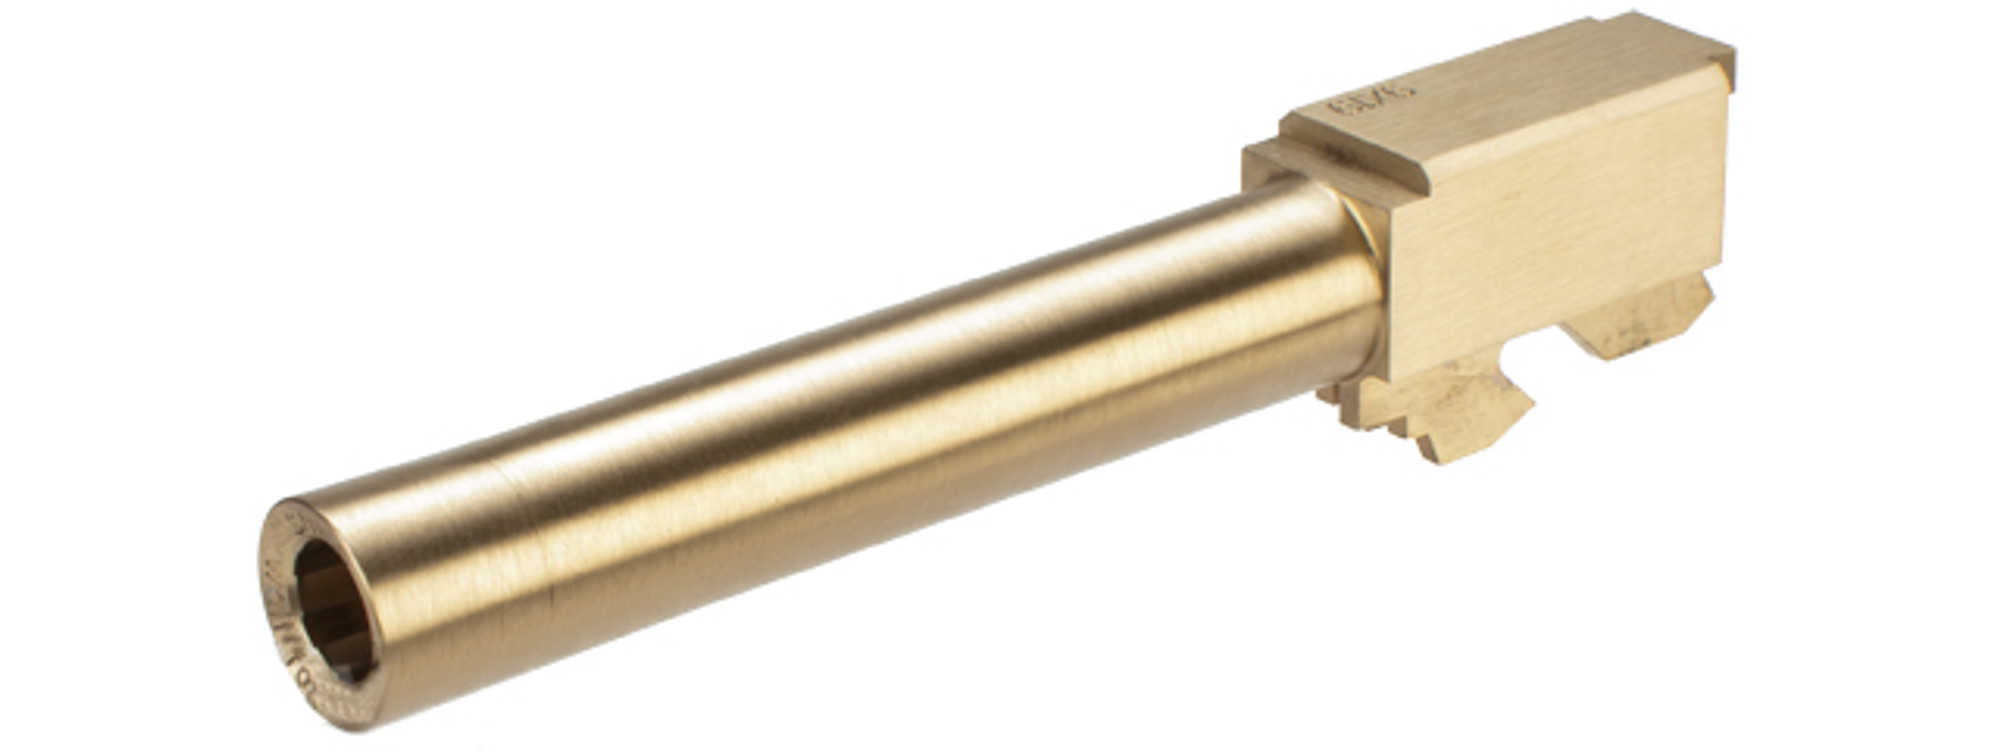 RA-Tech CNC Brass Outer Barrel for KWA / KSC G Series 17 Airsoft GBB Pistols